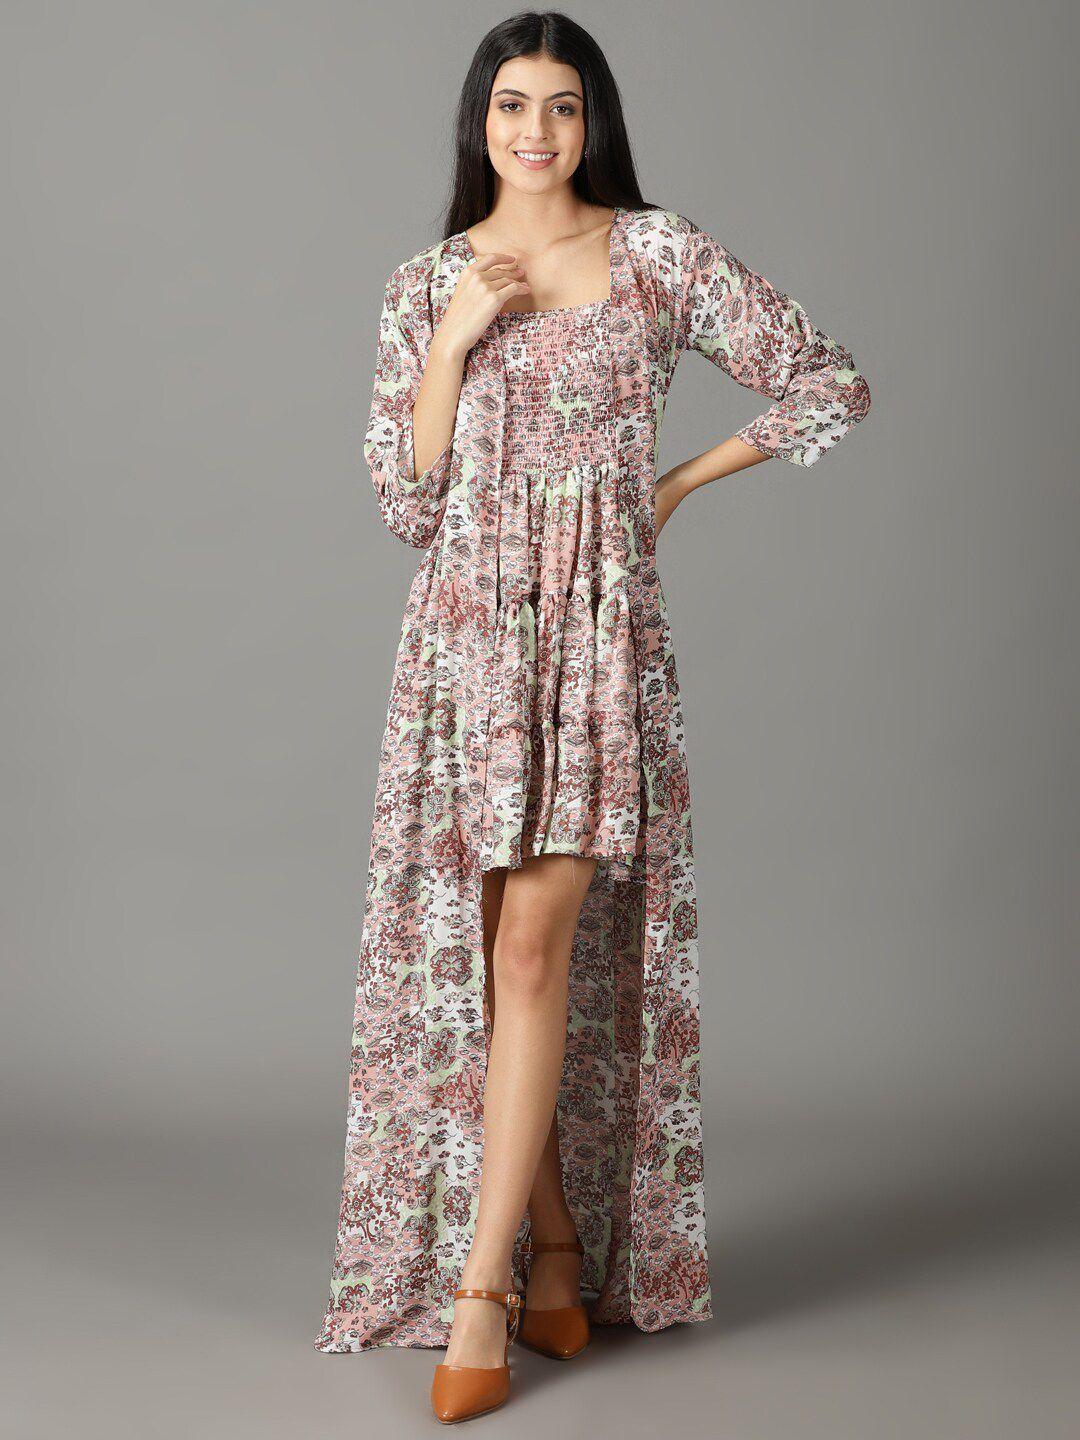 showoff-floral-layered-a-line-dress